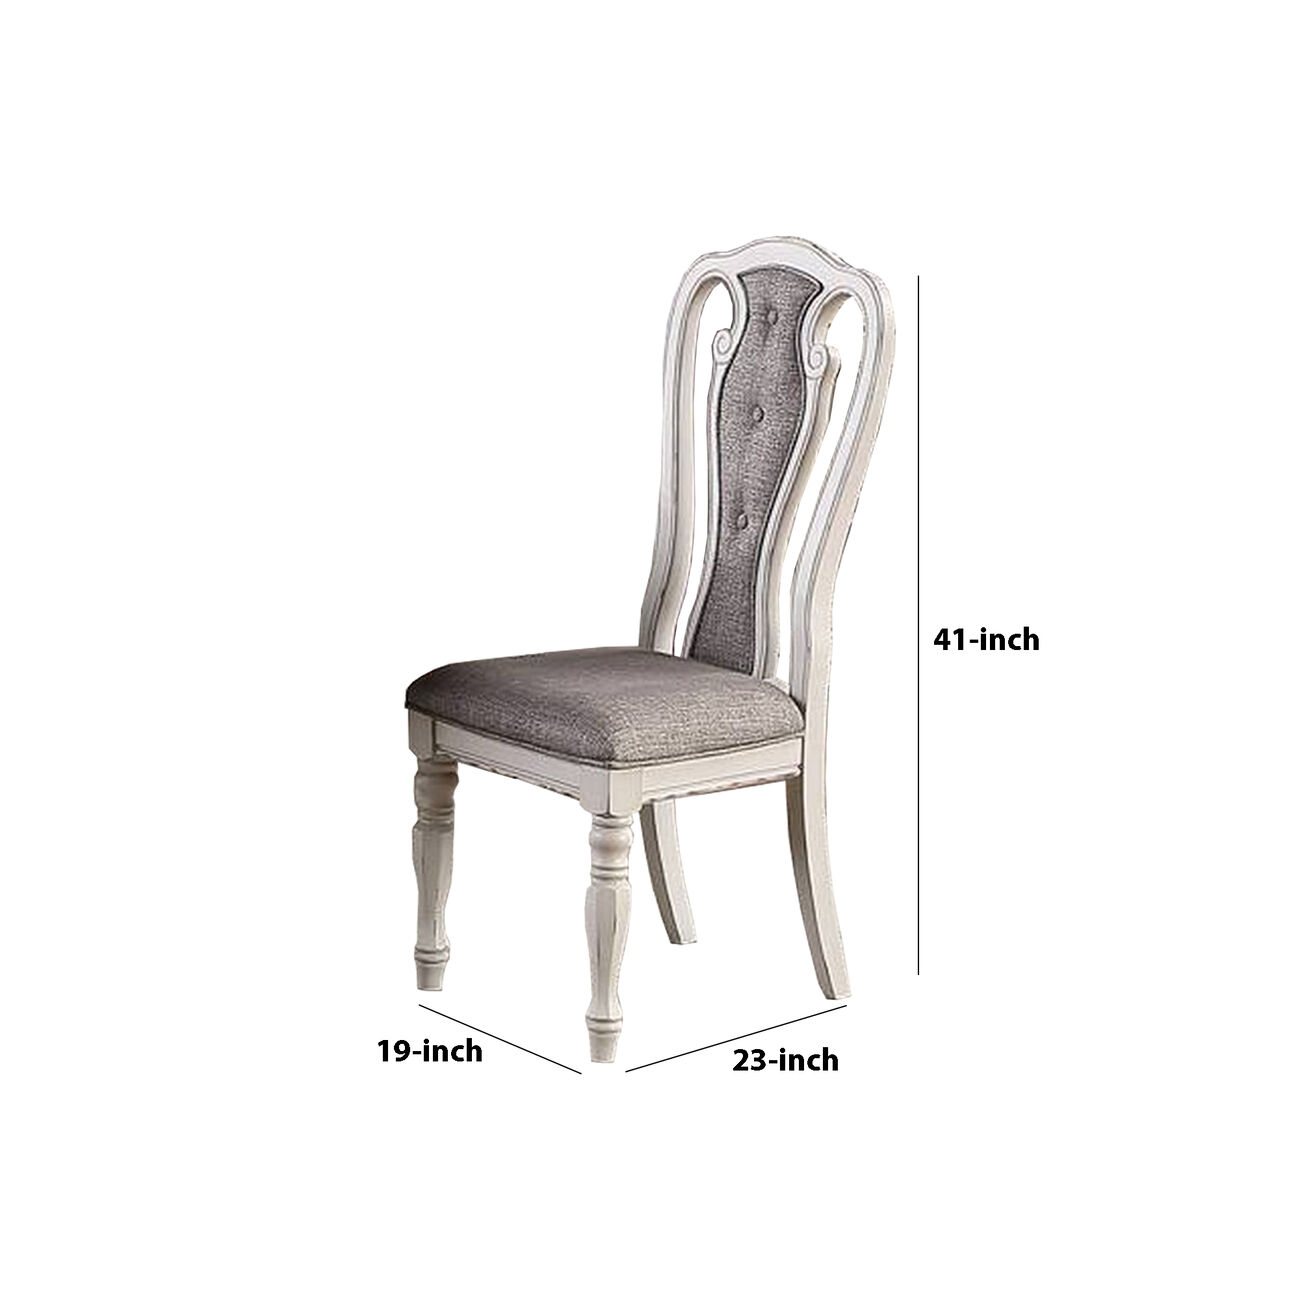 Dining Chair with Button Tufted Backrest and Padded Seat Set of 2, White and Gray